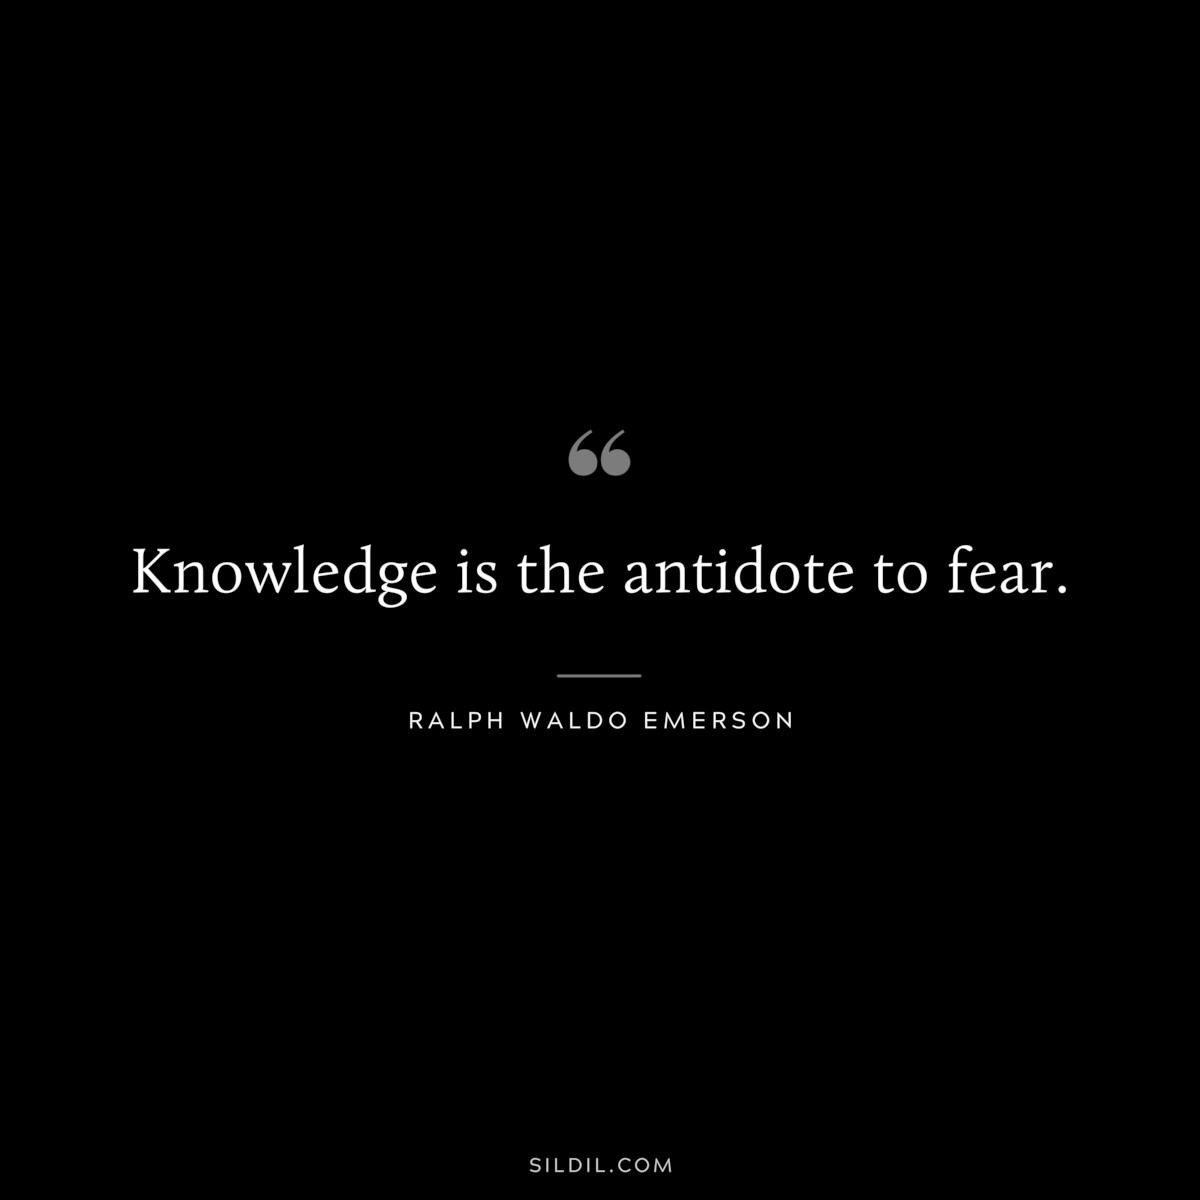 Knowledge is the antidote to fear. — Ralph Waldo Emerson